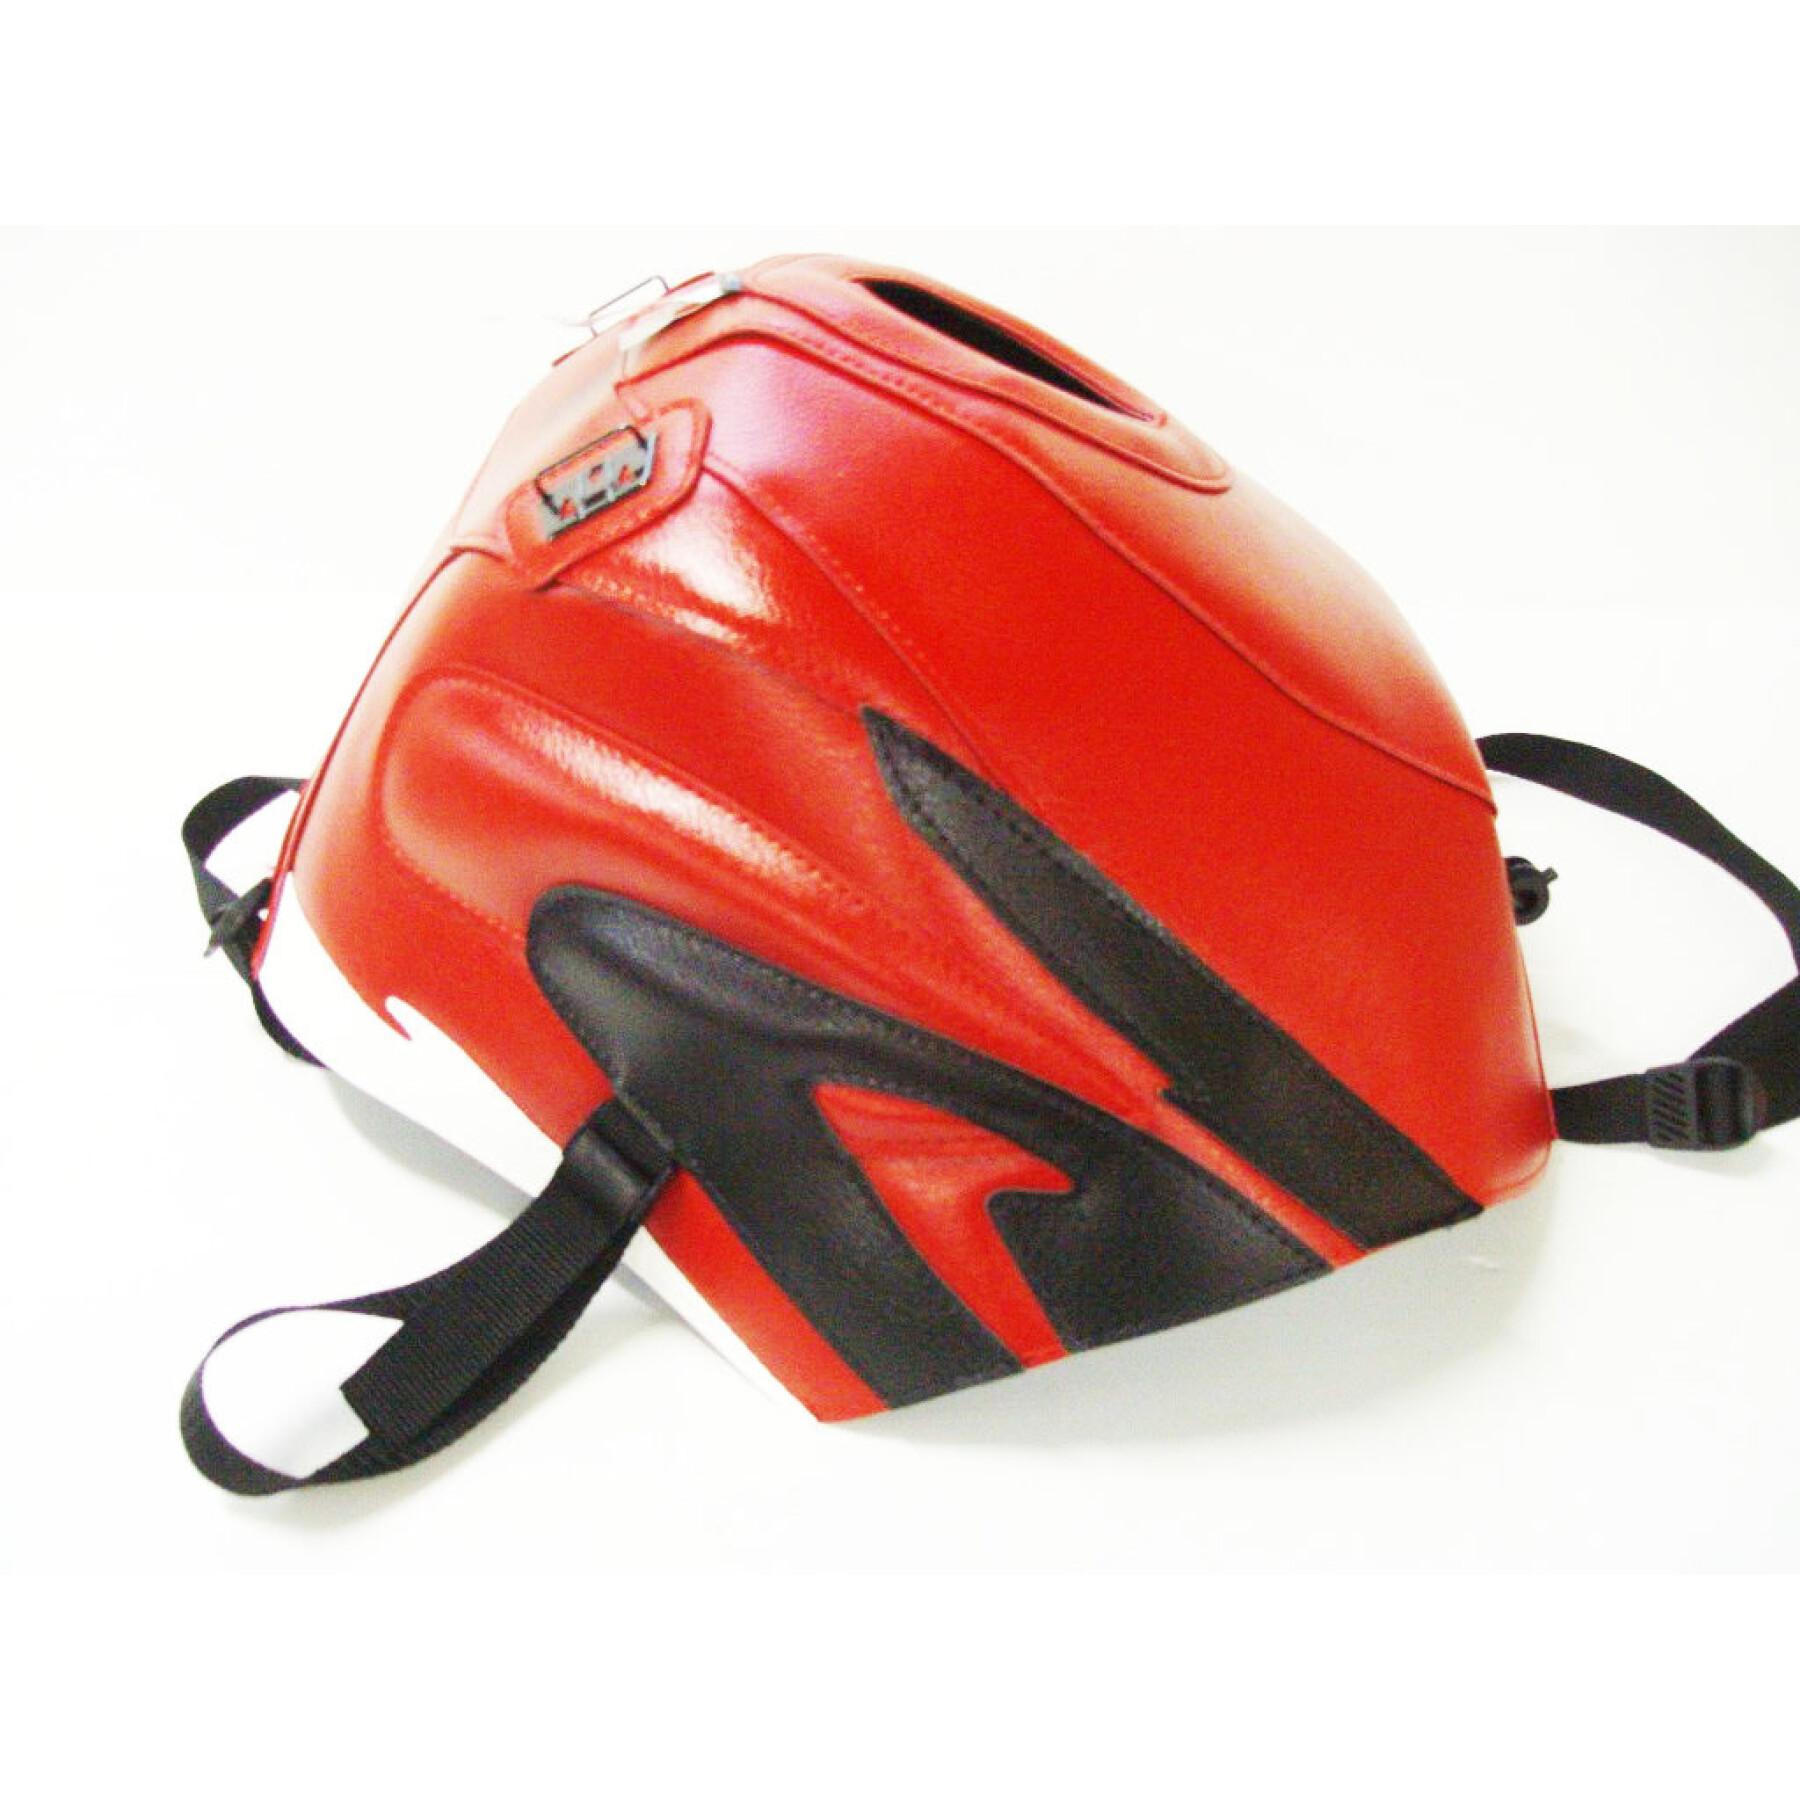 Motorcycle tank cover Bagster cbr